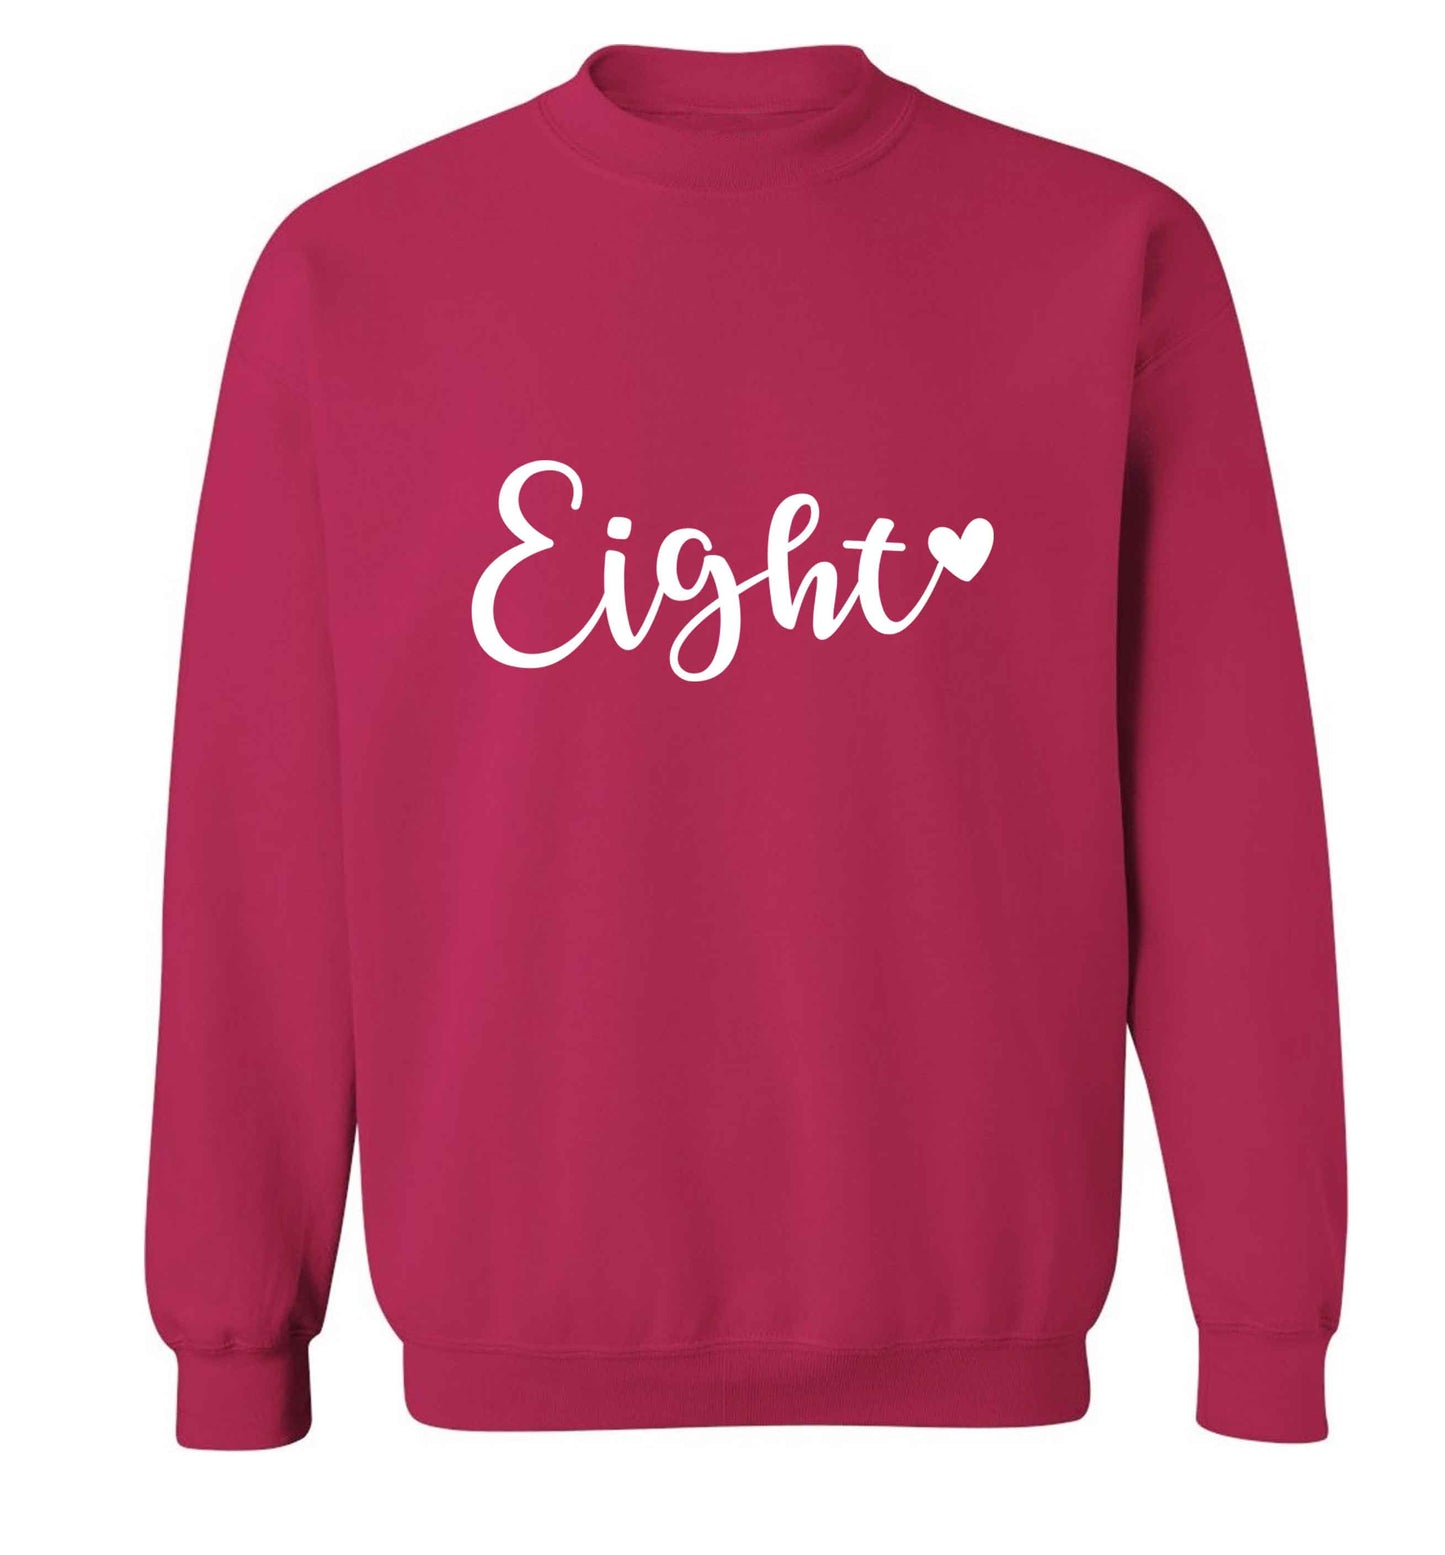 Eight and heart adult's unisex pink sweater 2XL